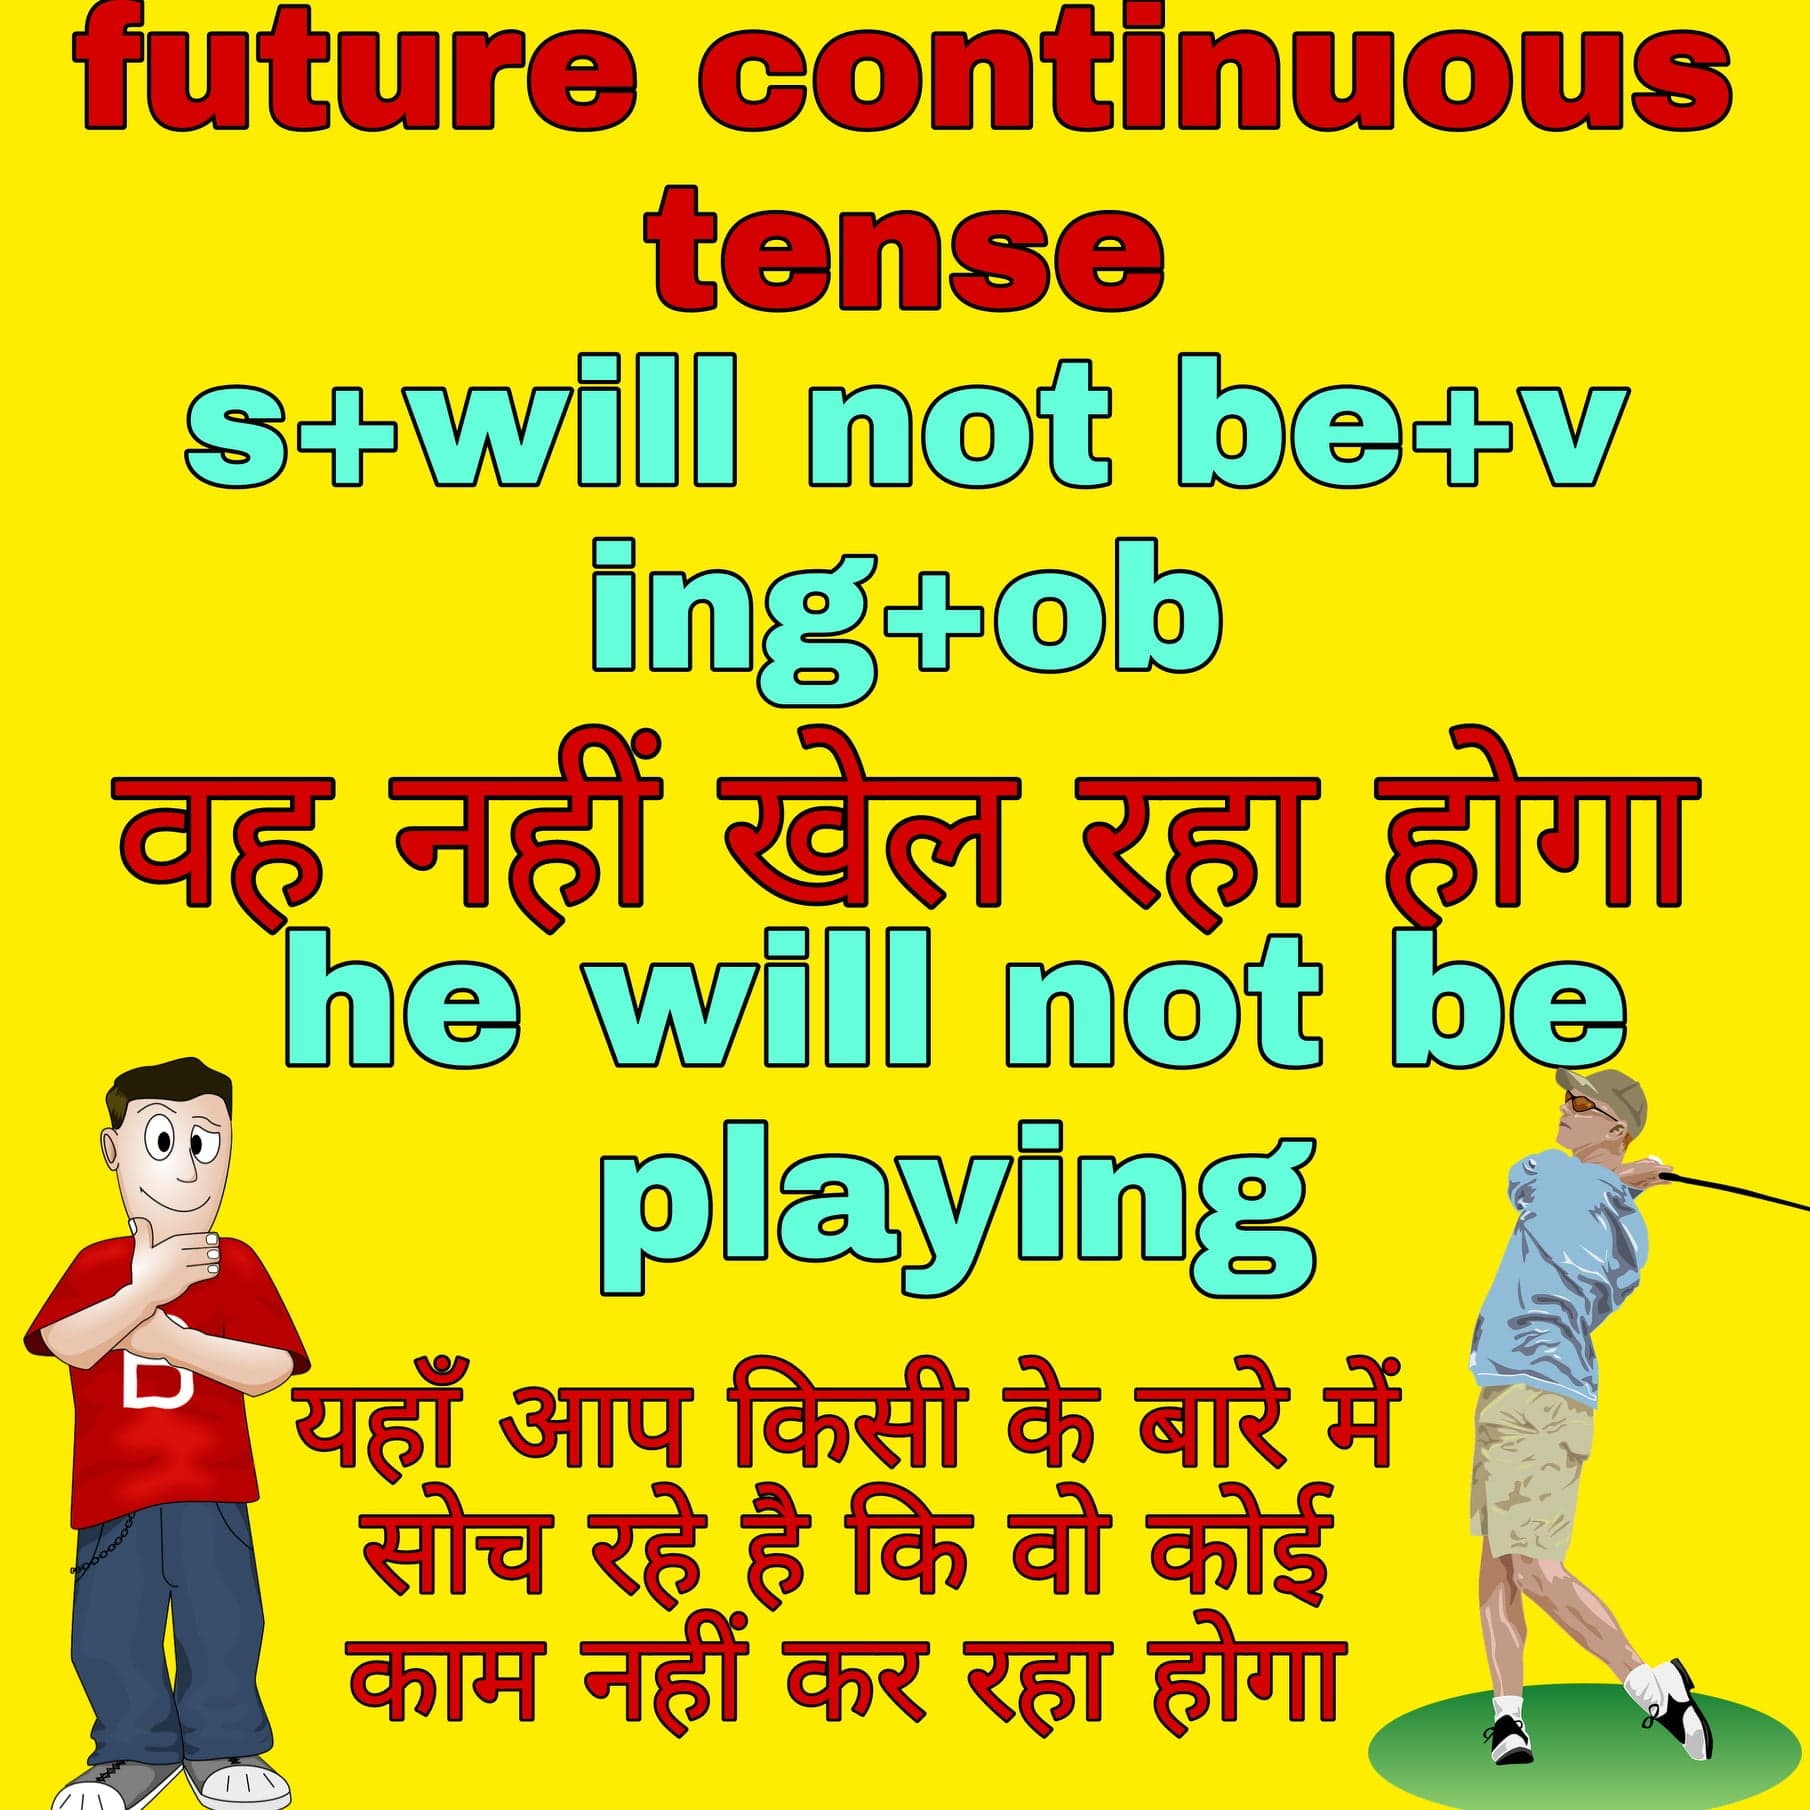 future-continuous-tense-4-rules